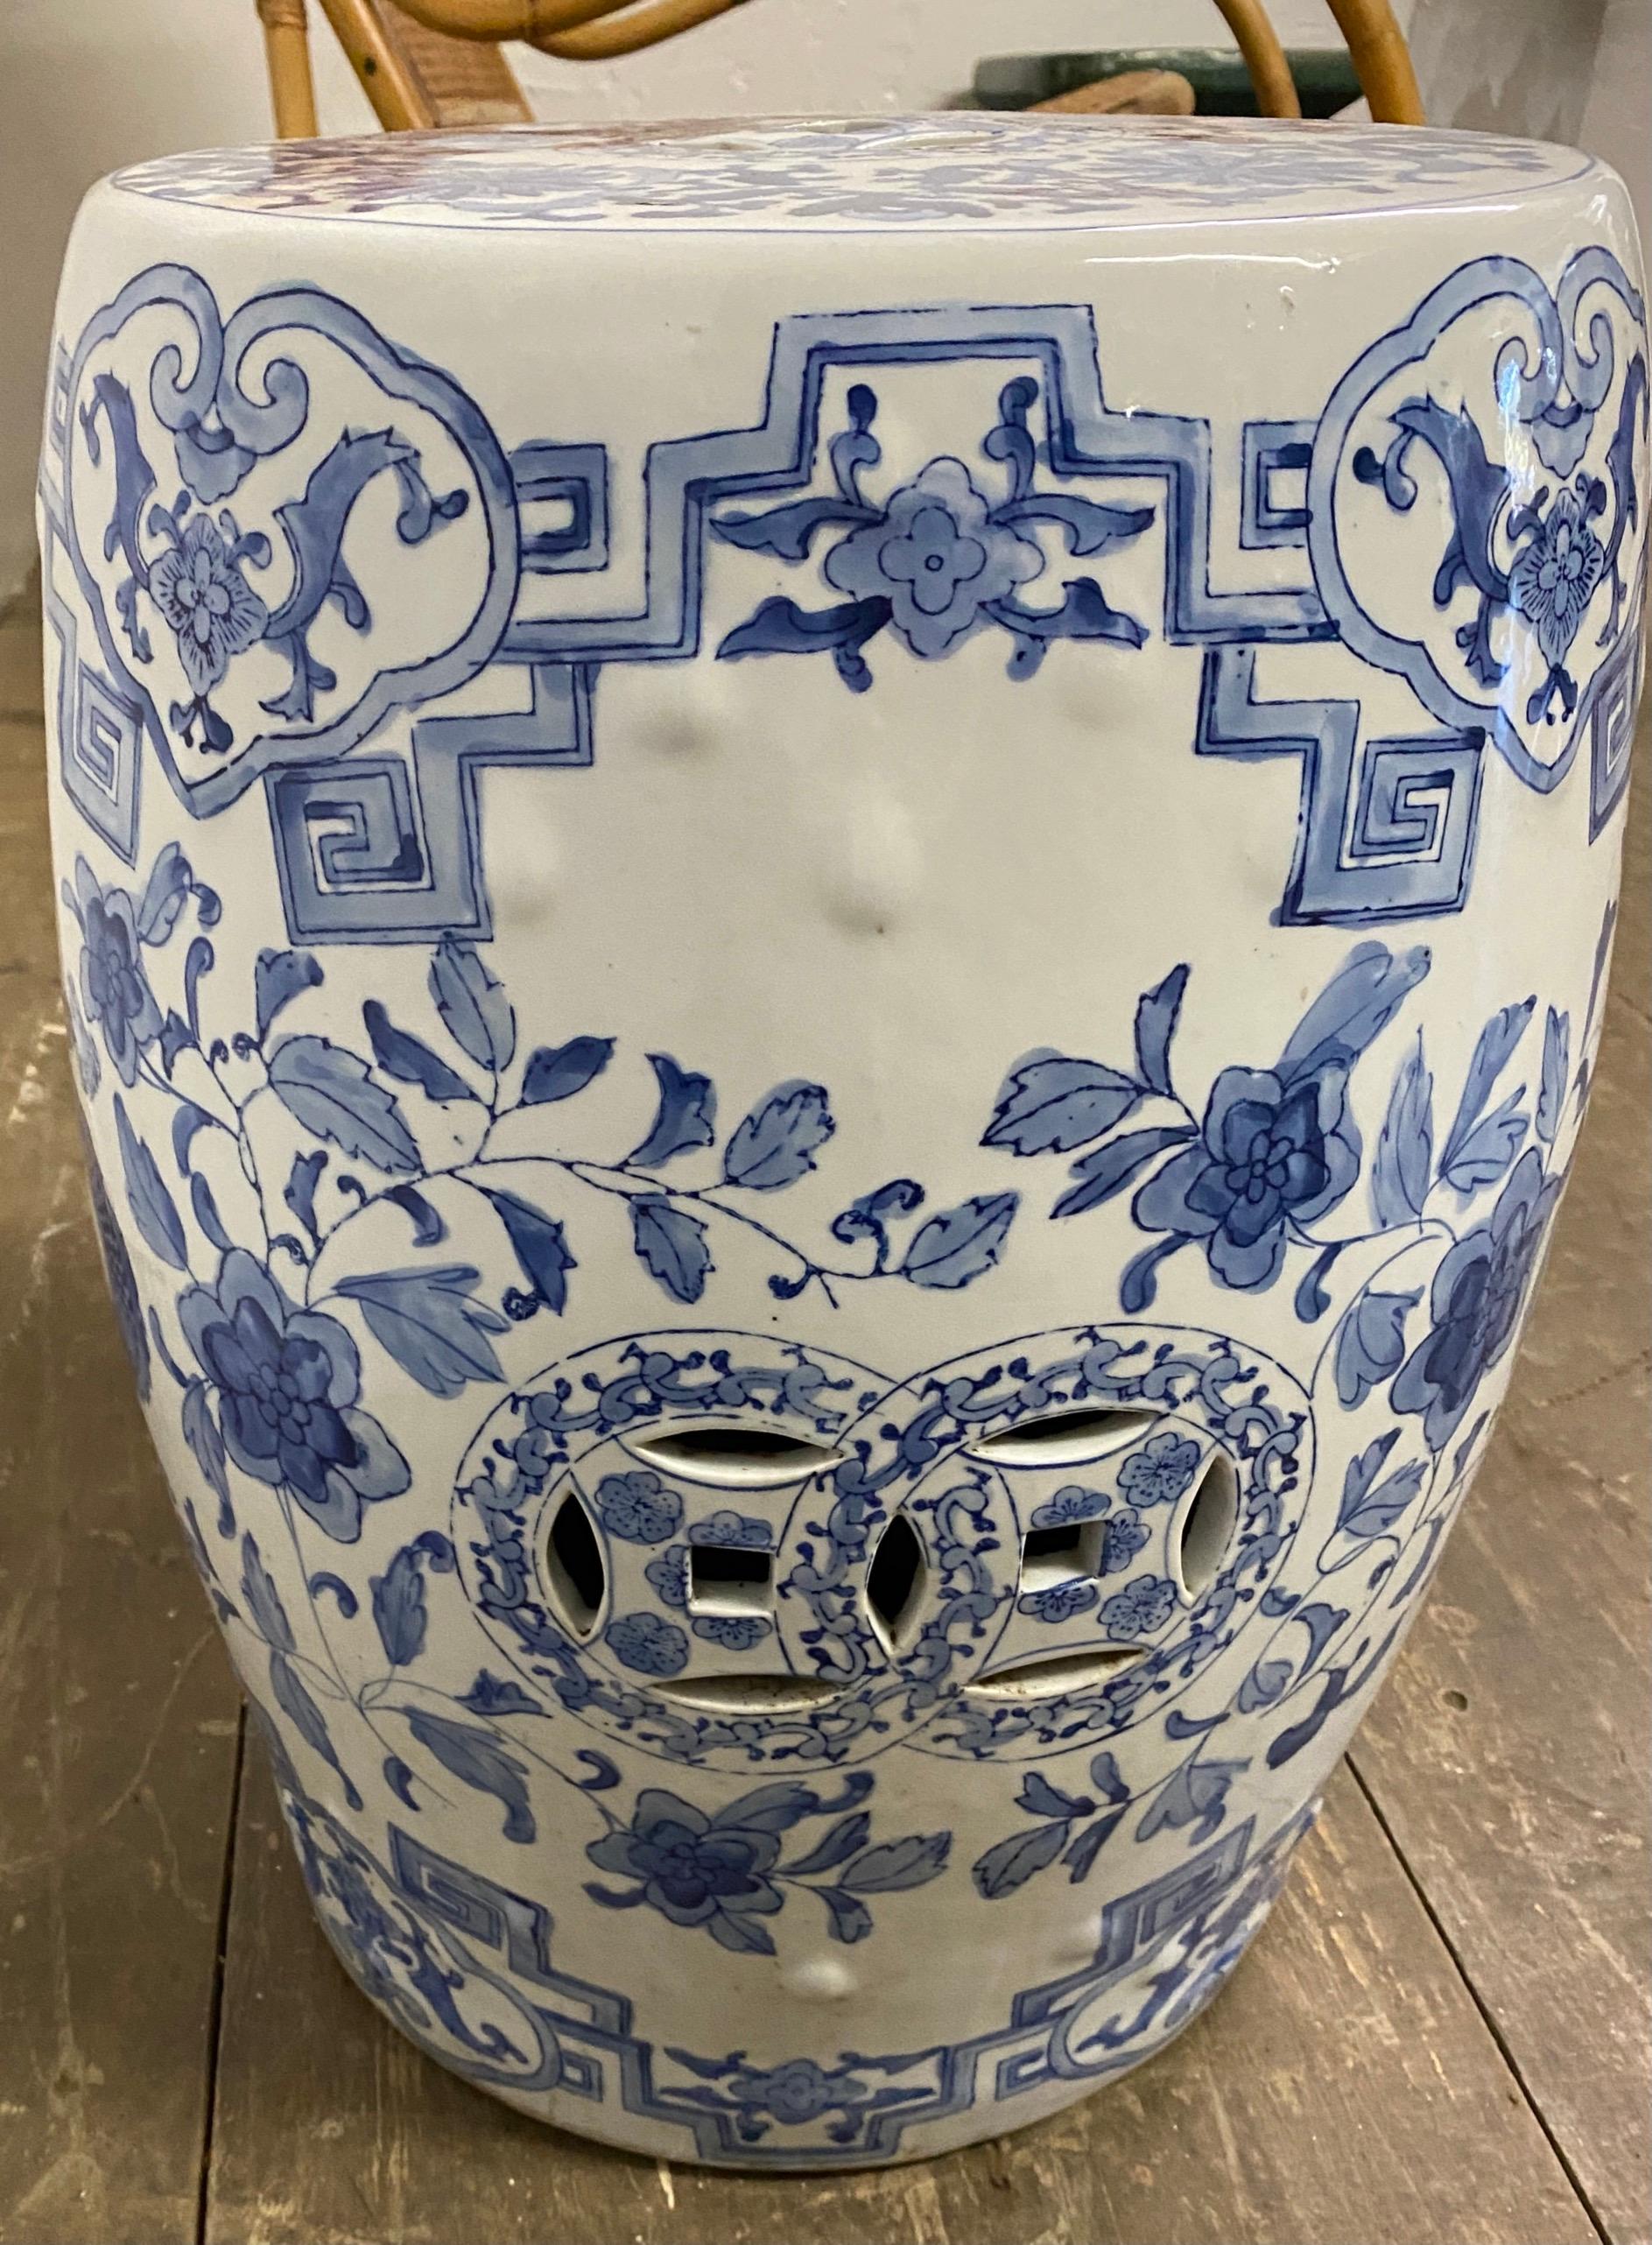 Vintage Chinese export porcelain blue white garden drum seat or stool with dragon and phoenix decoration. Can be used as side table, end table or occasional table.